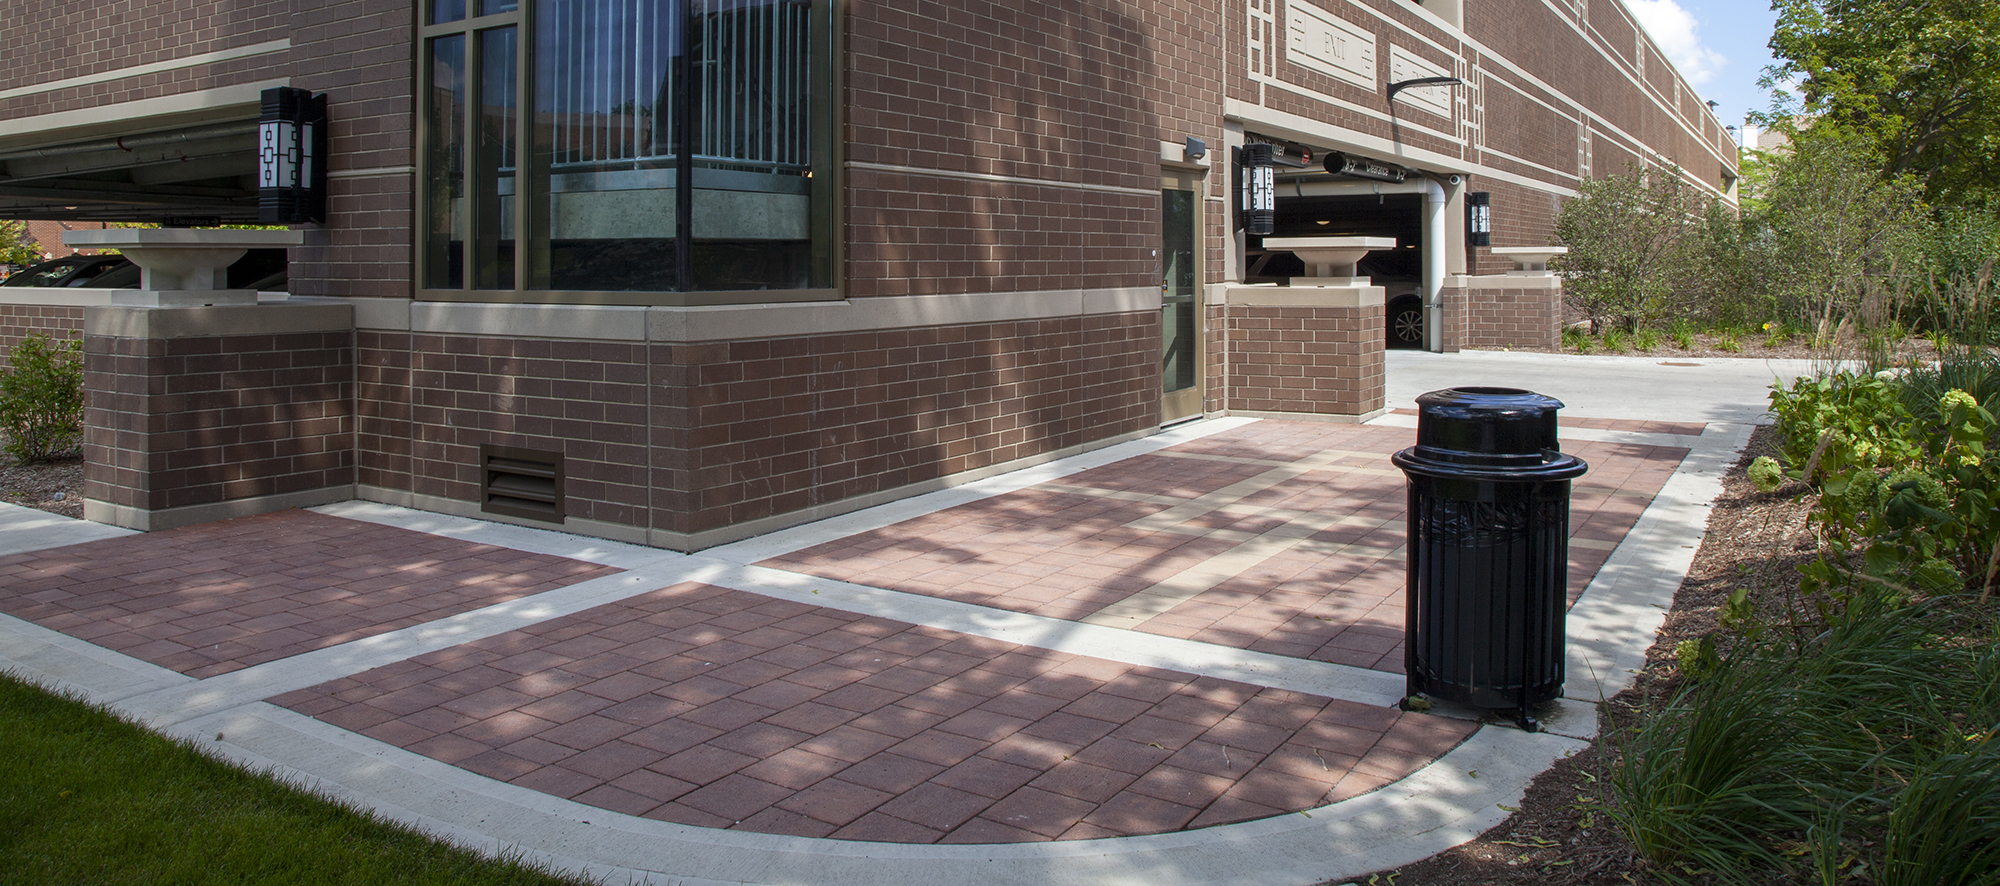 Red and beige Eco-Priora pavers continue around the corner of a red brick parking garage with a garbage can on the side.